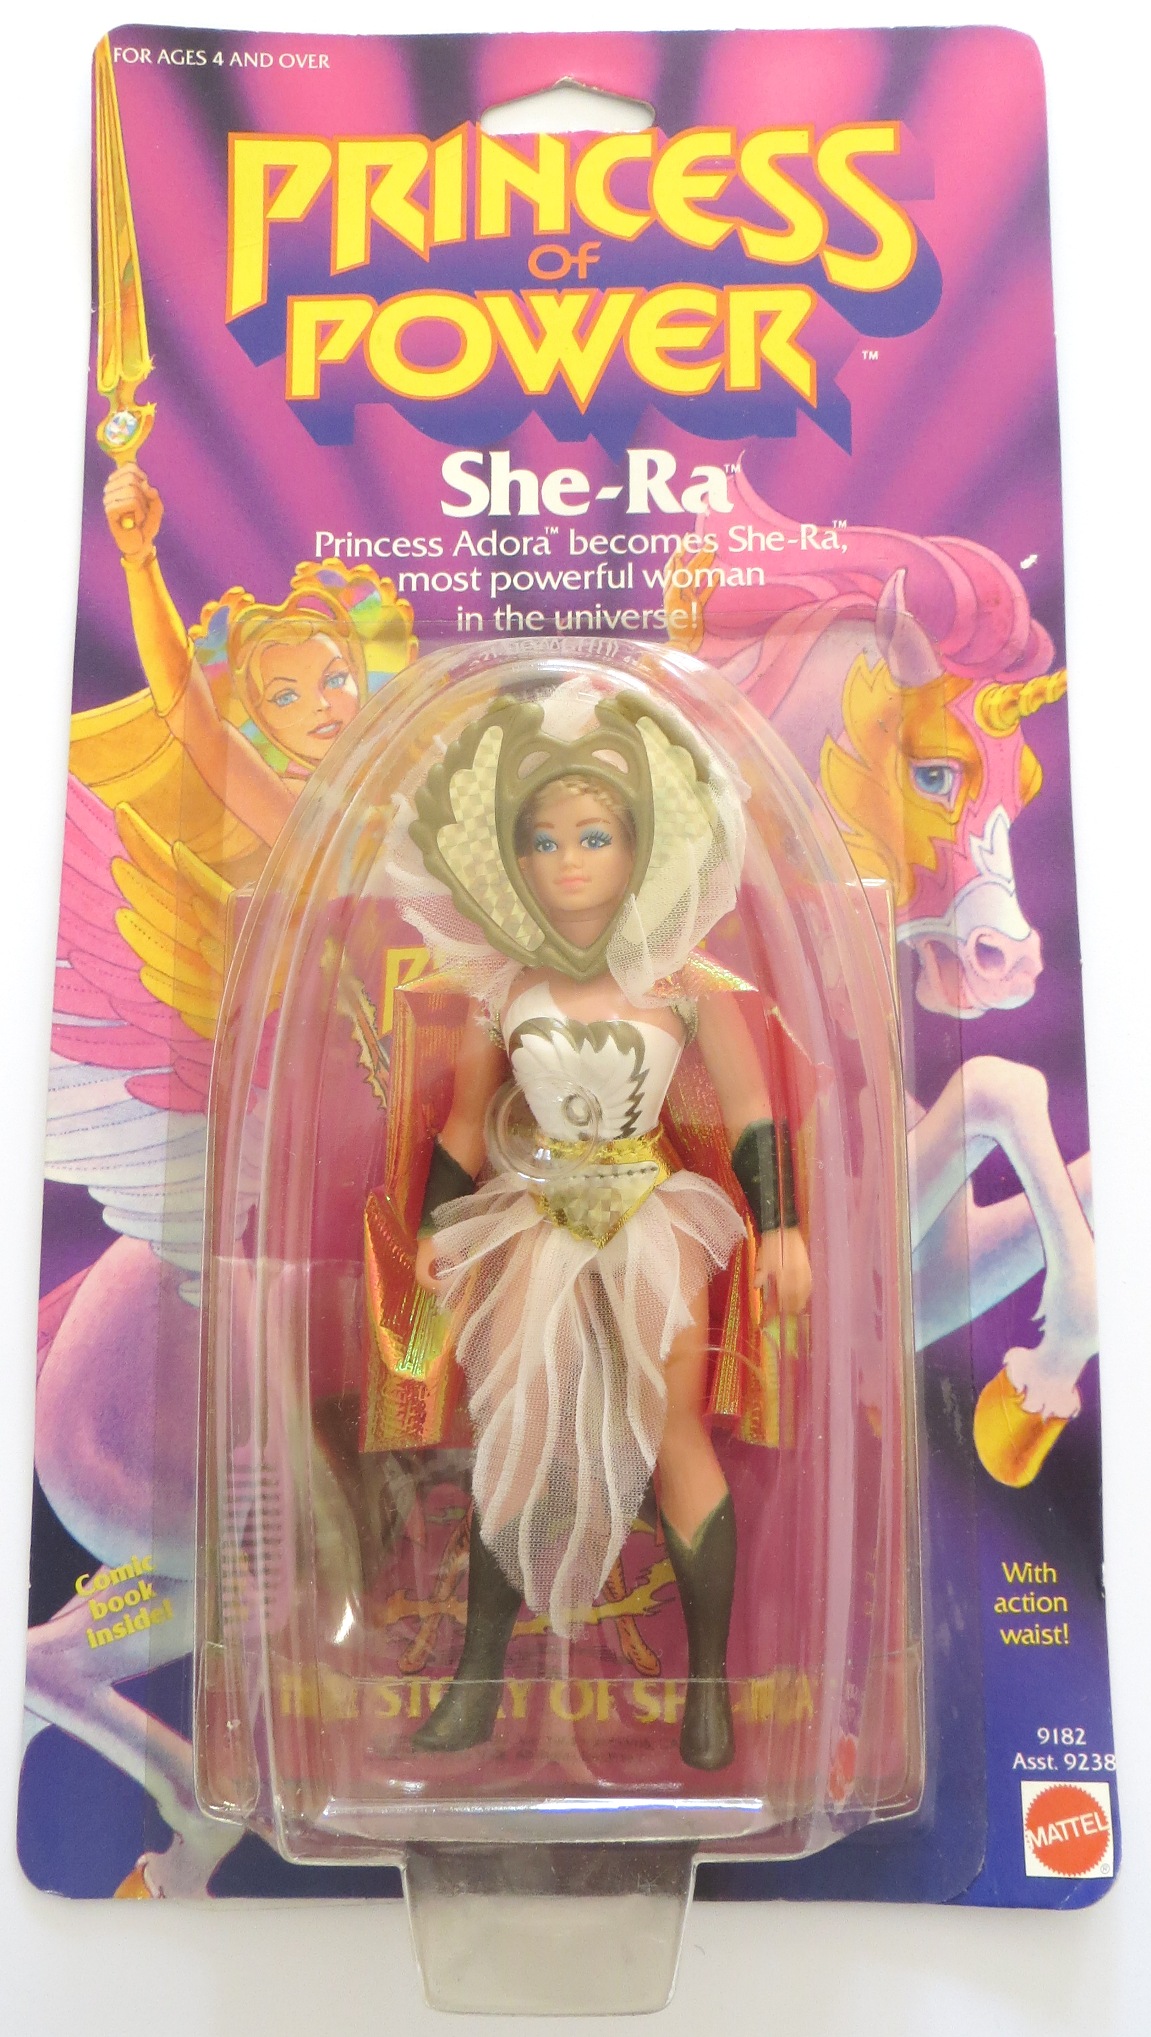 She-Ra Princess of Power 1980s Vintage Action figures incomplete MULTI-LISTING 